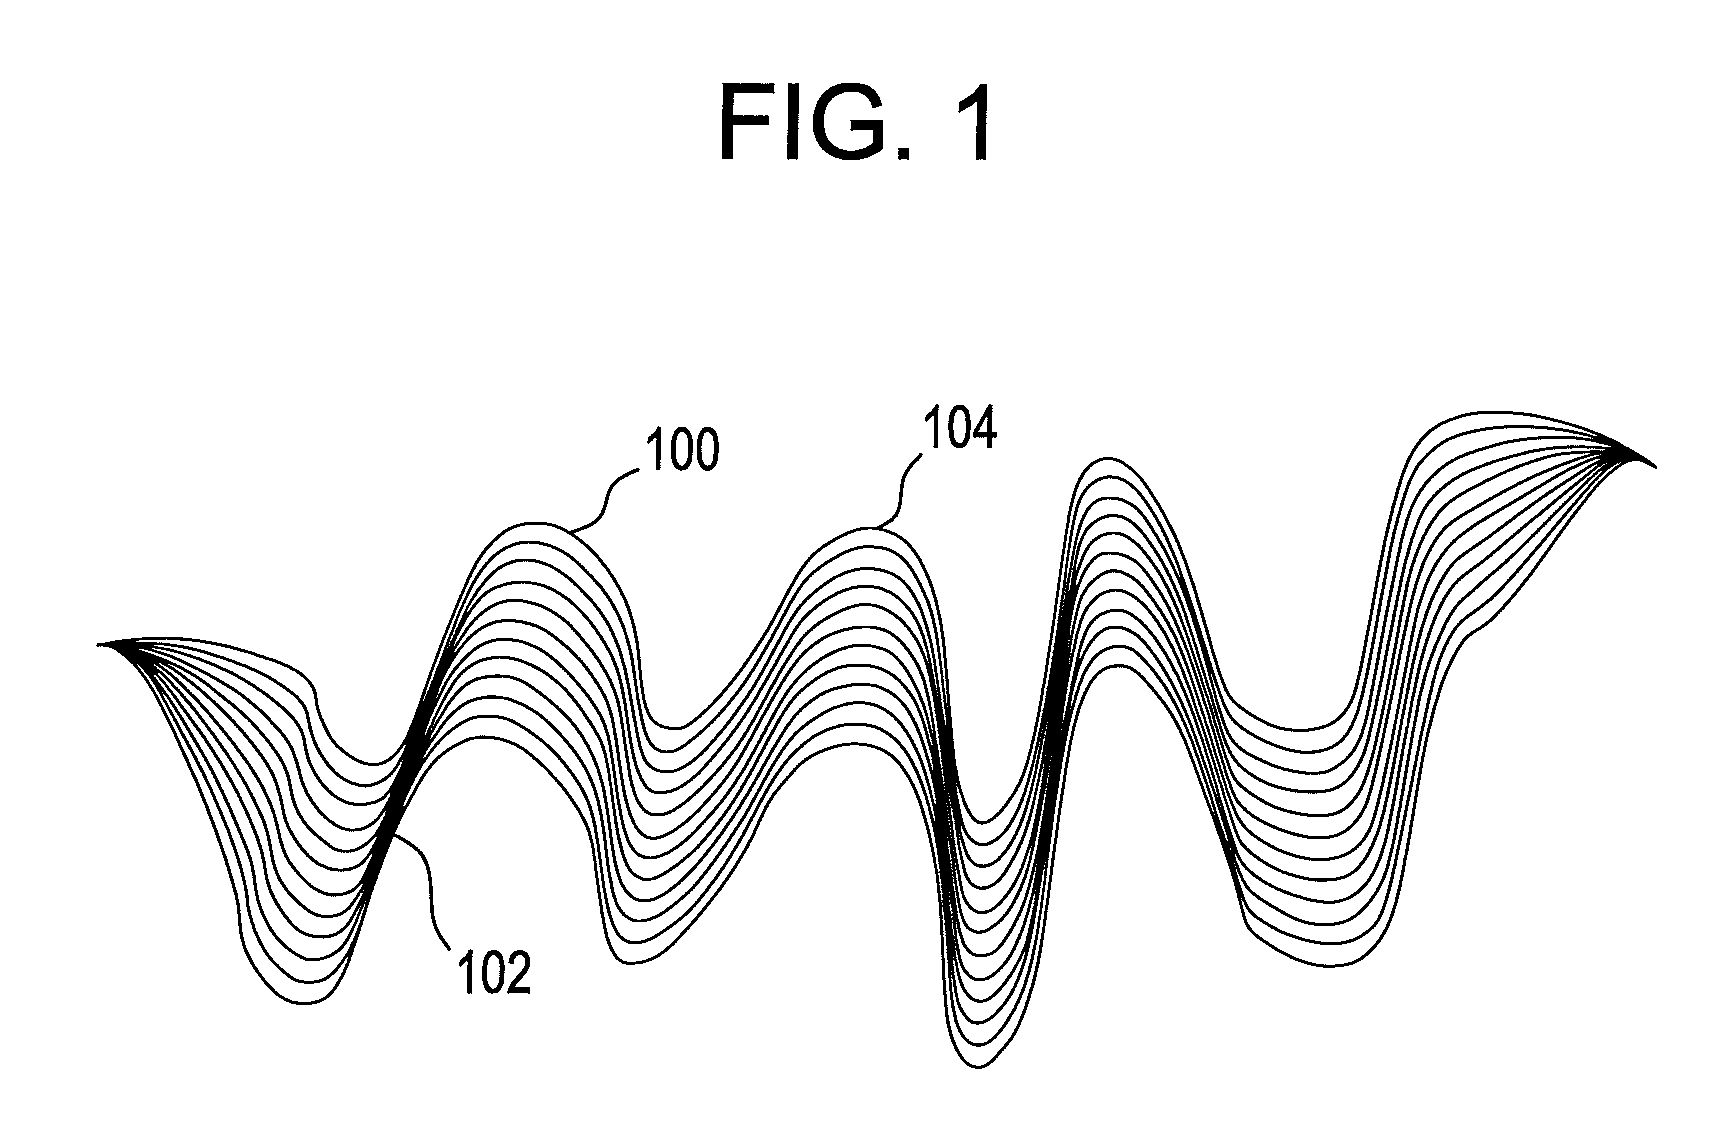 Ophthalmic lens with repeating wave patterns